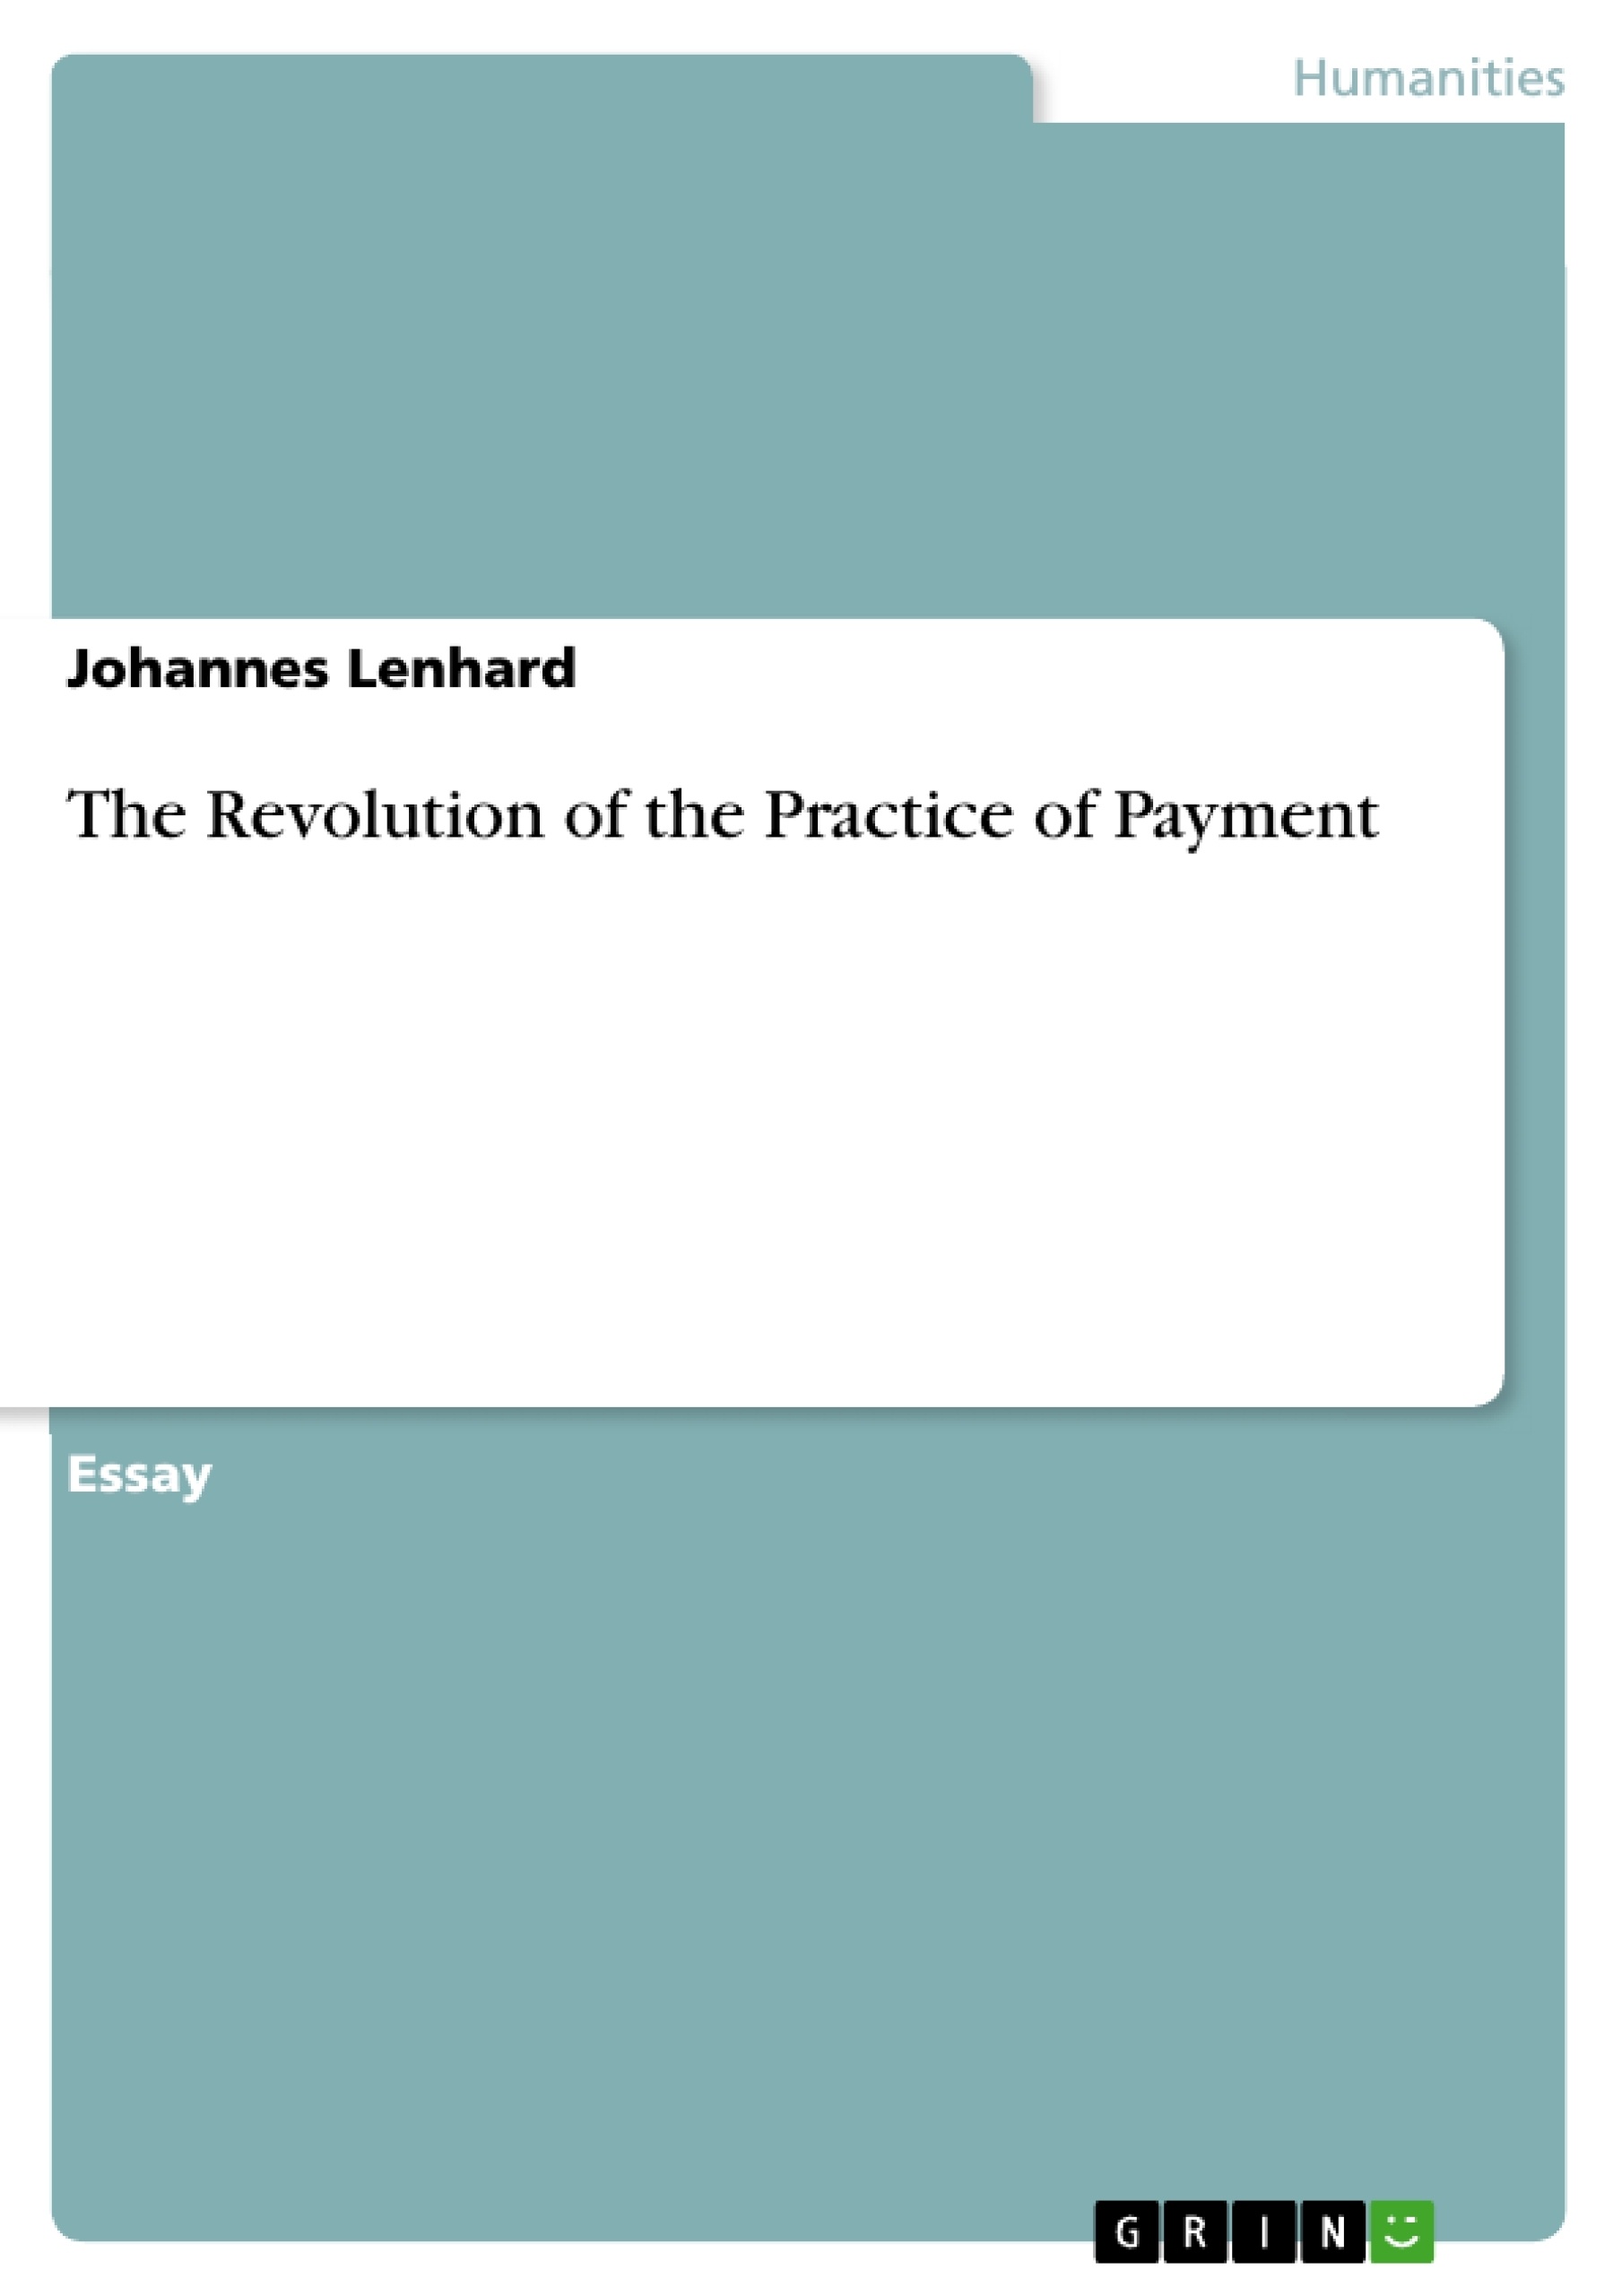 Título: The Revolution of the Practice of Payment